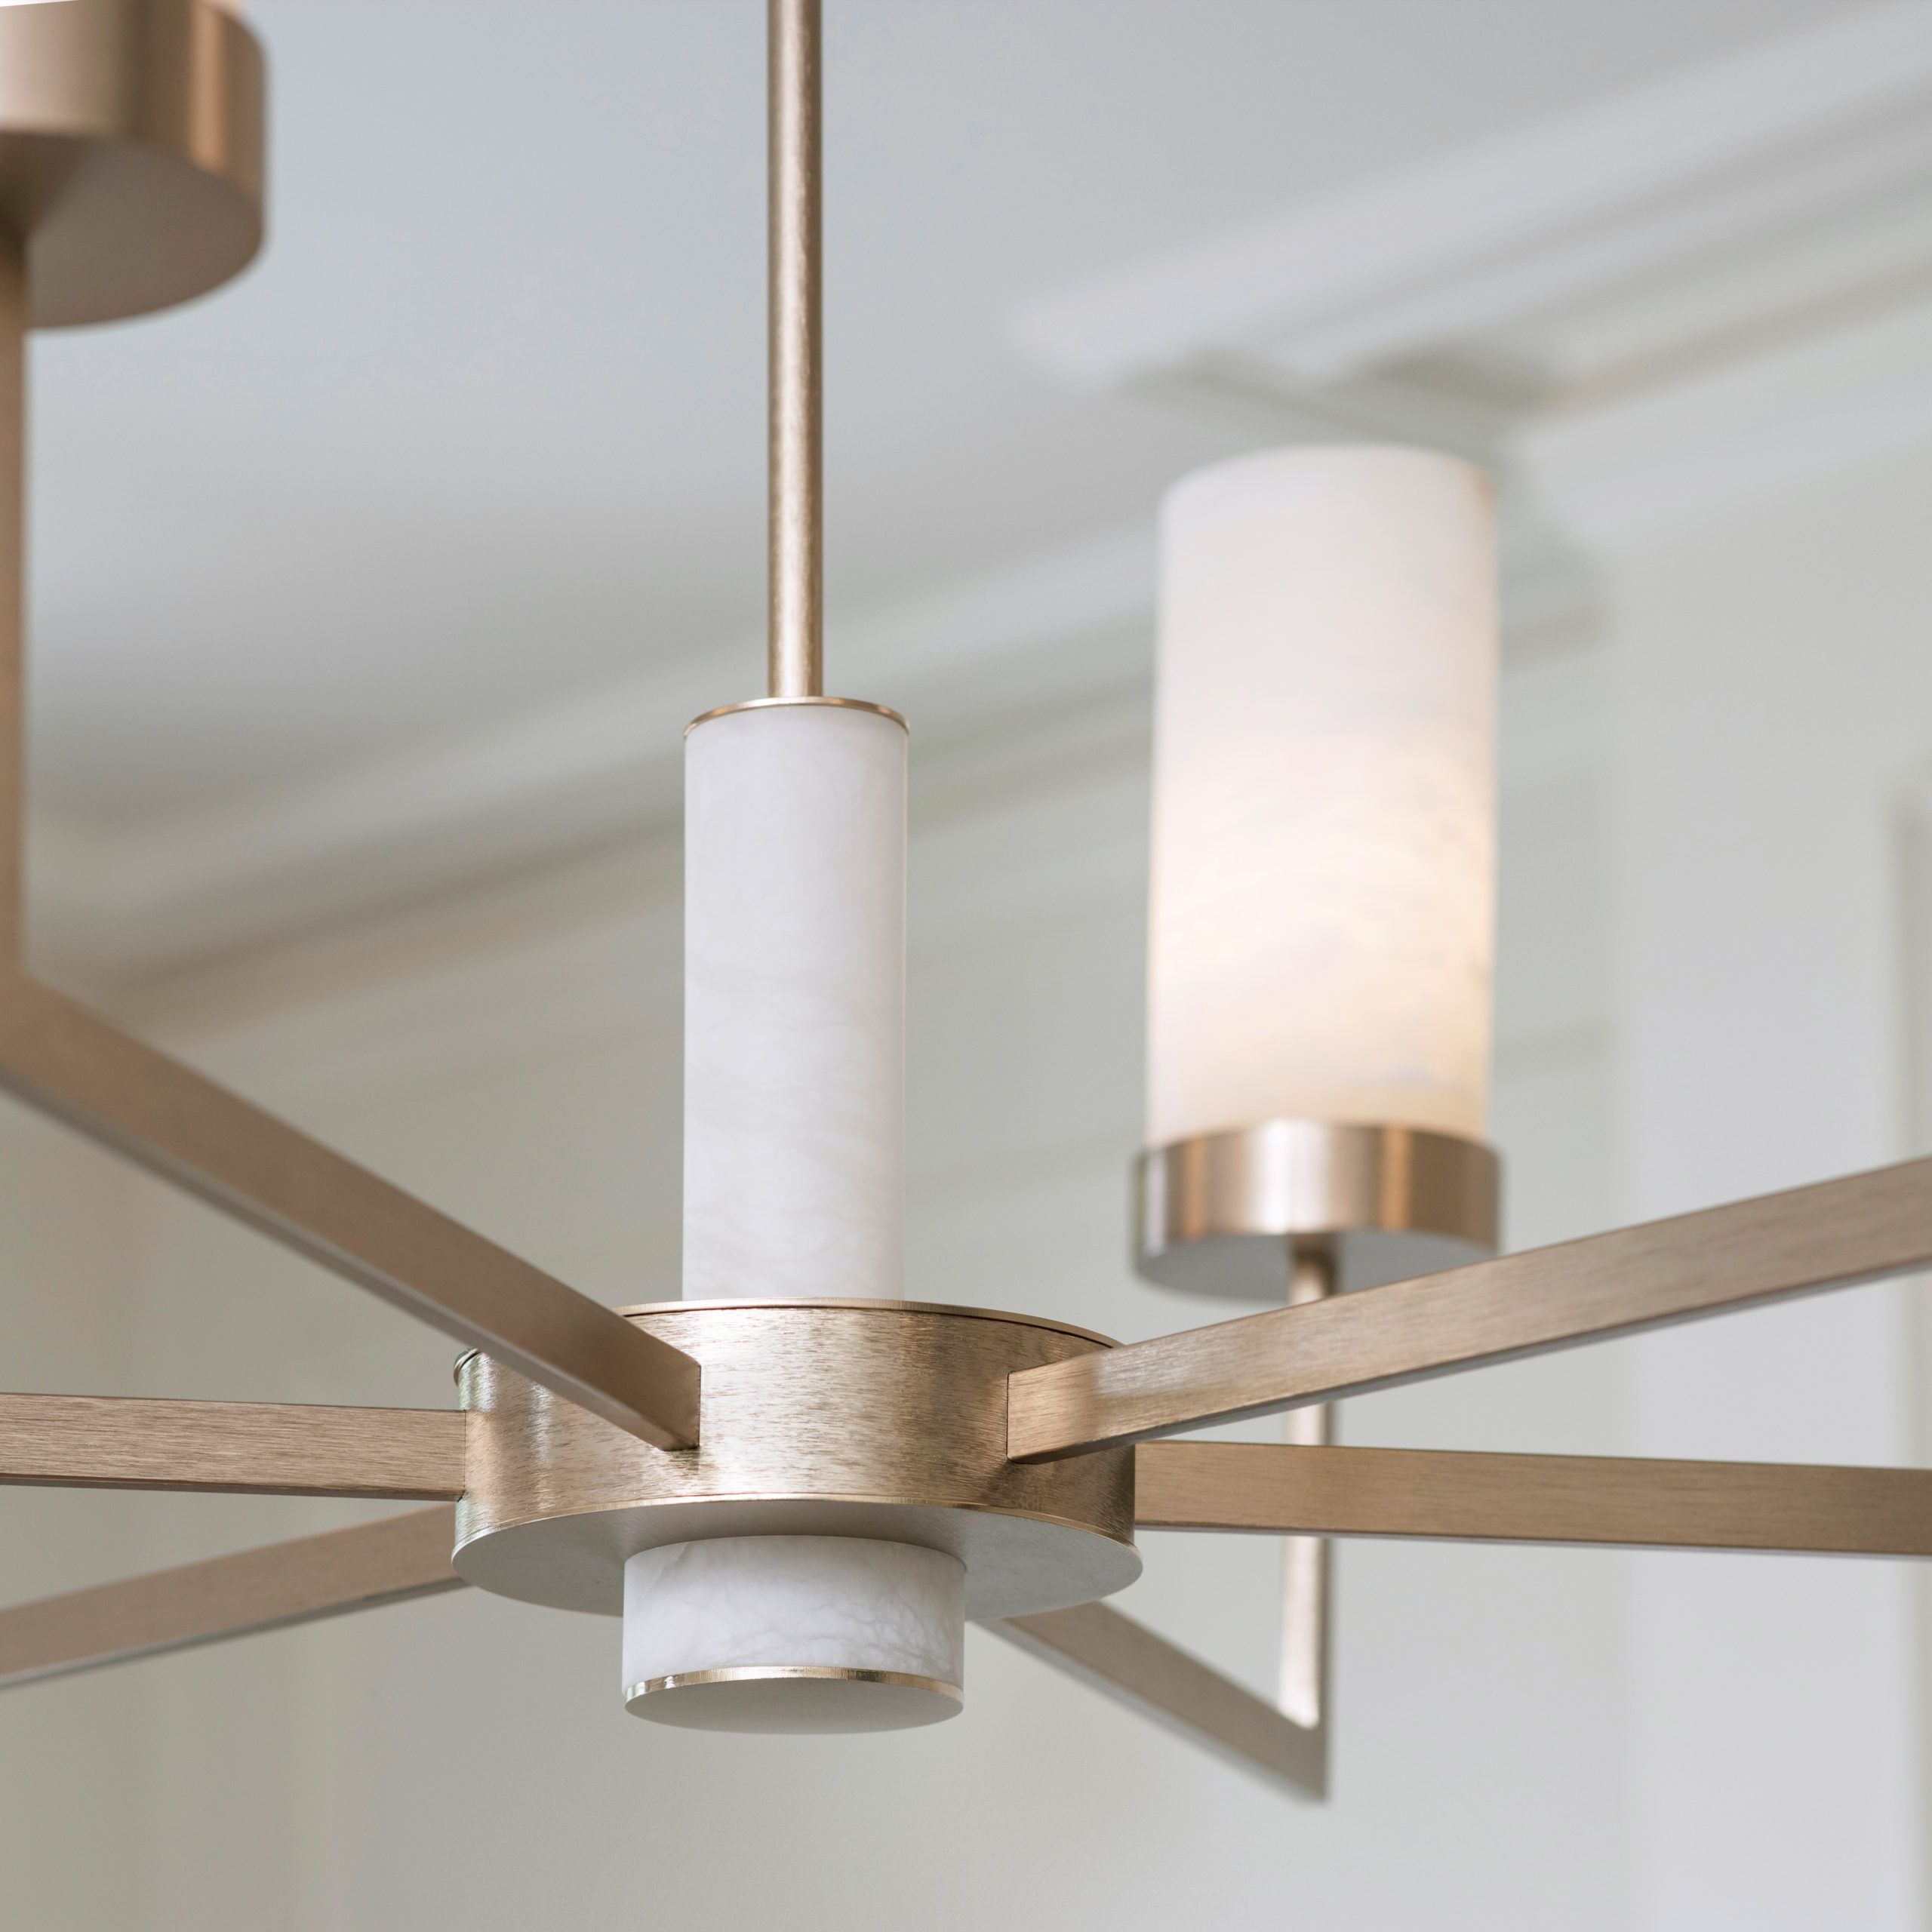 Chandelier COMPASS by Tigermoth